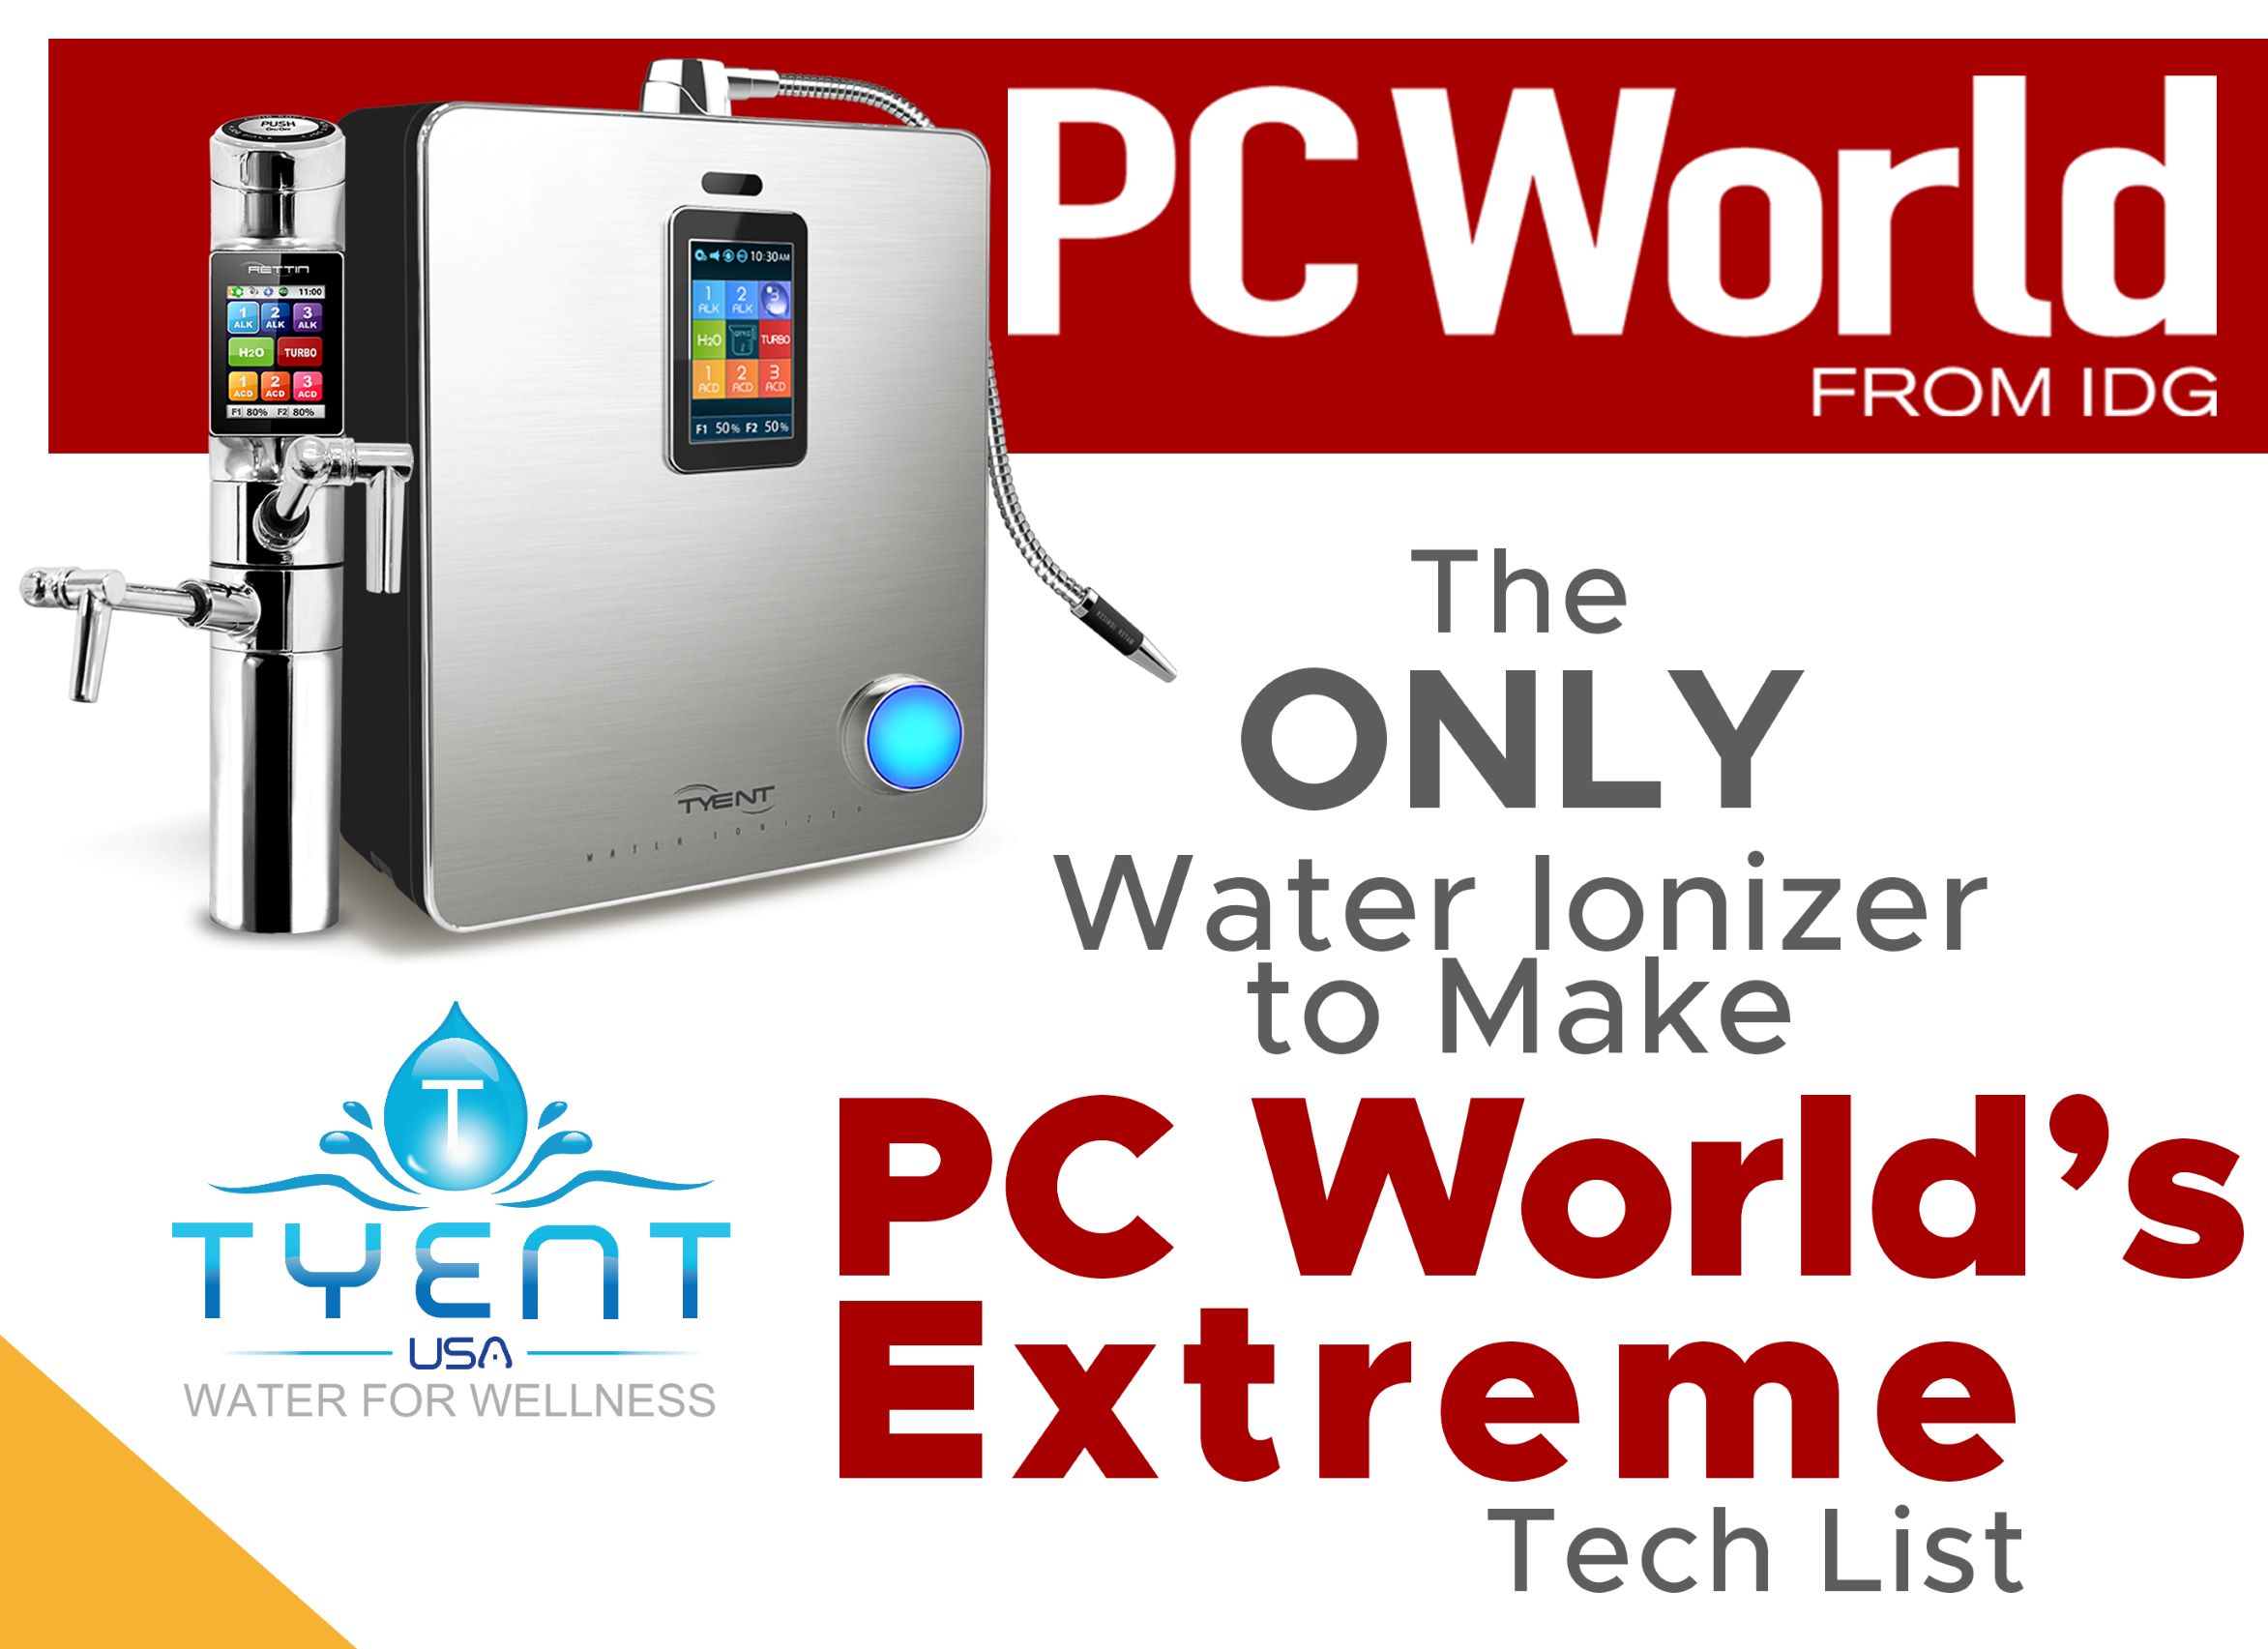 The ONLY Water Ionizer to Make PC World’s Extreme Tech List 